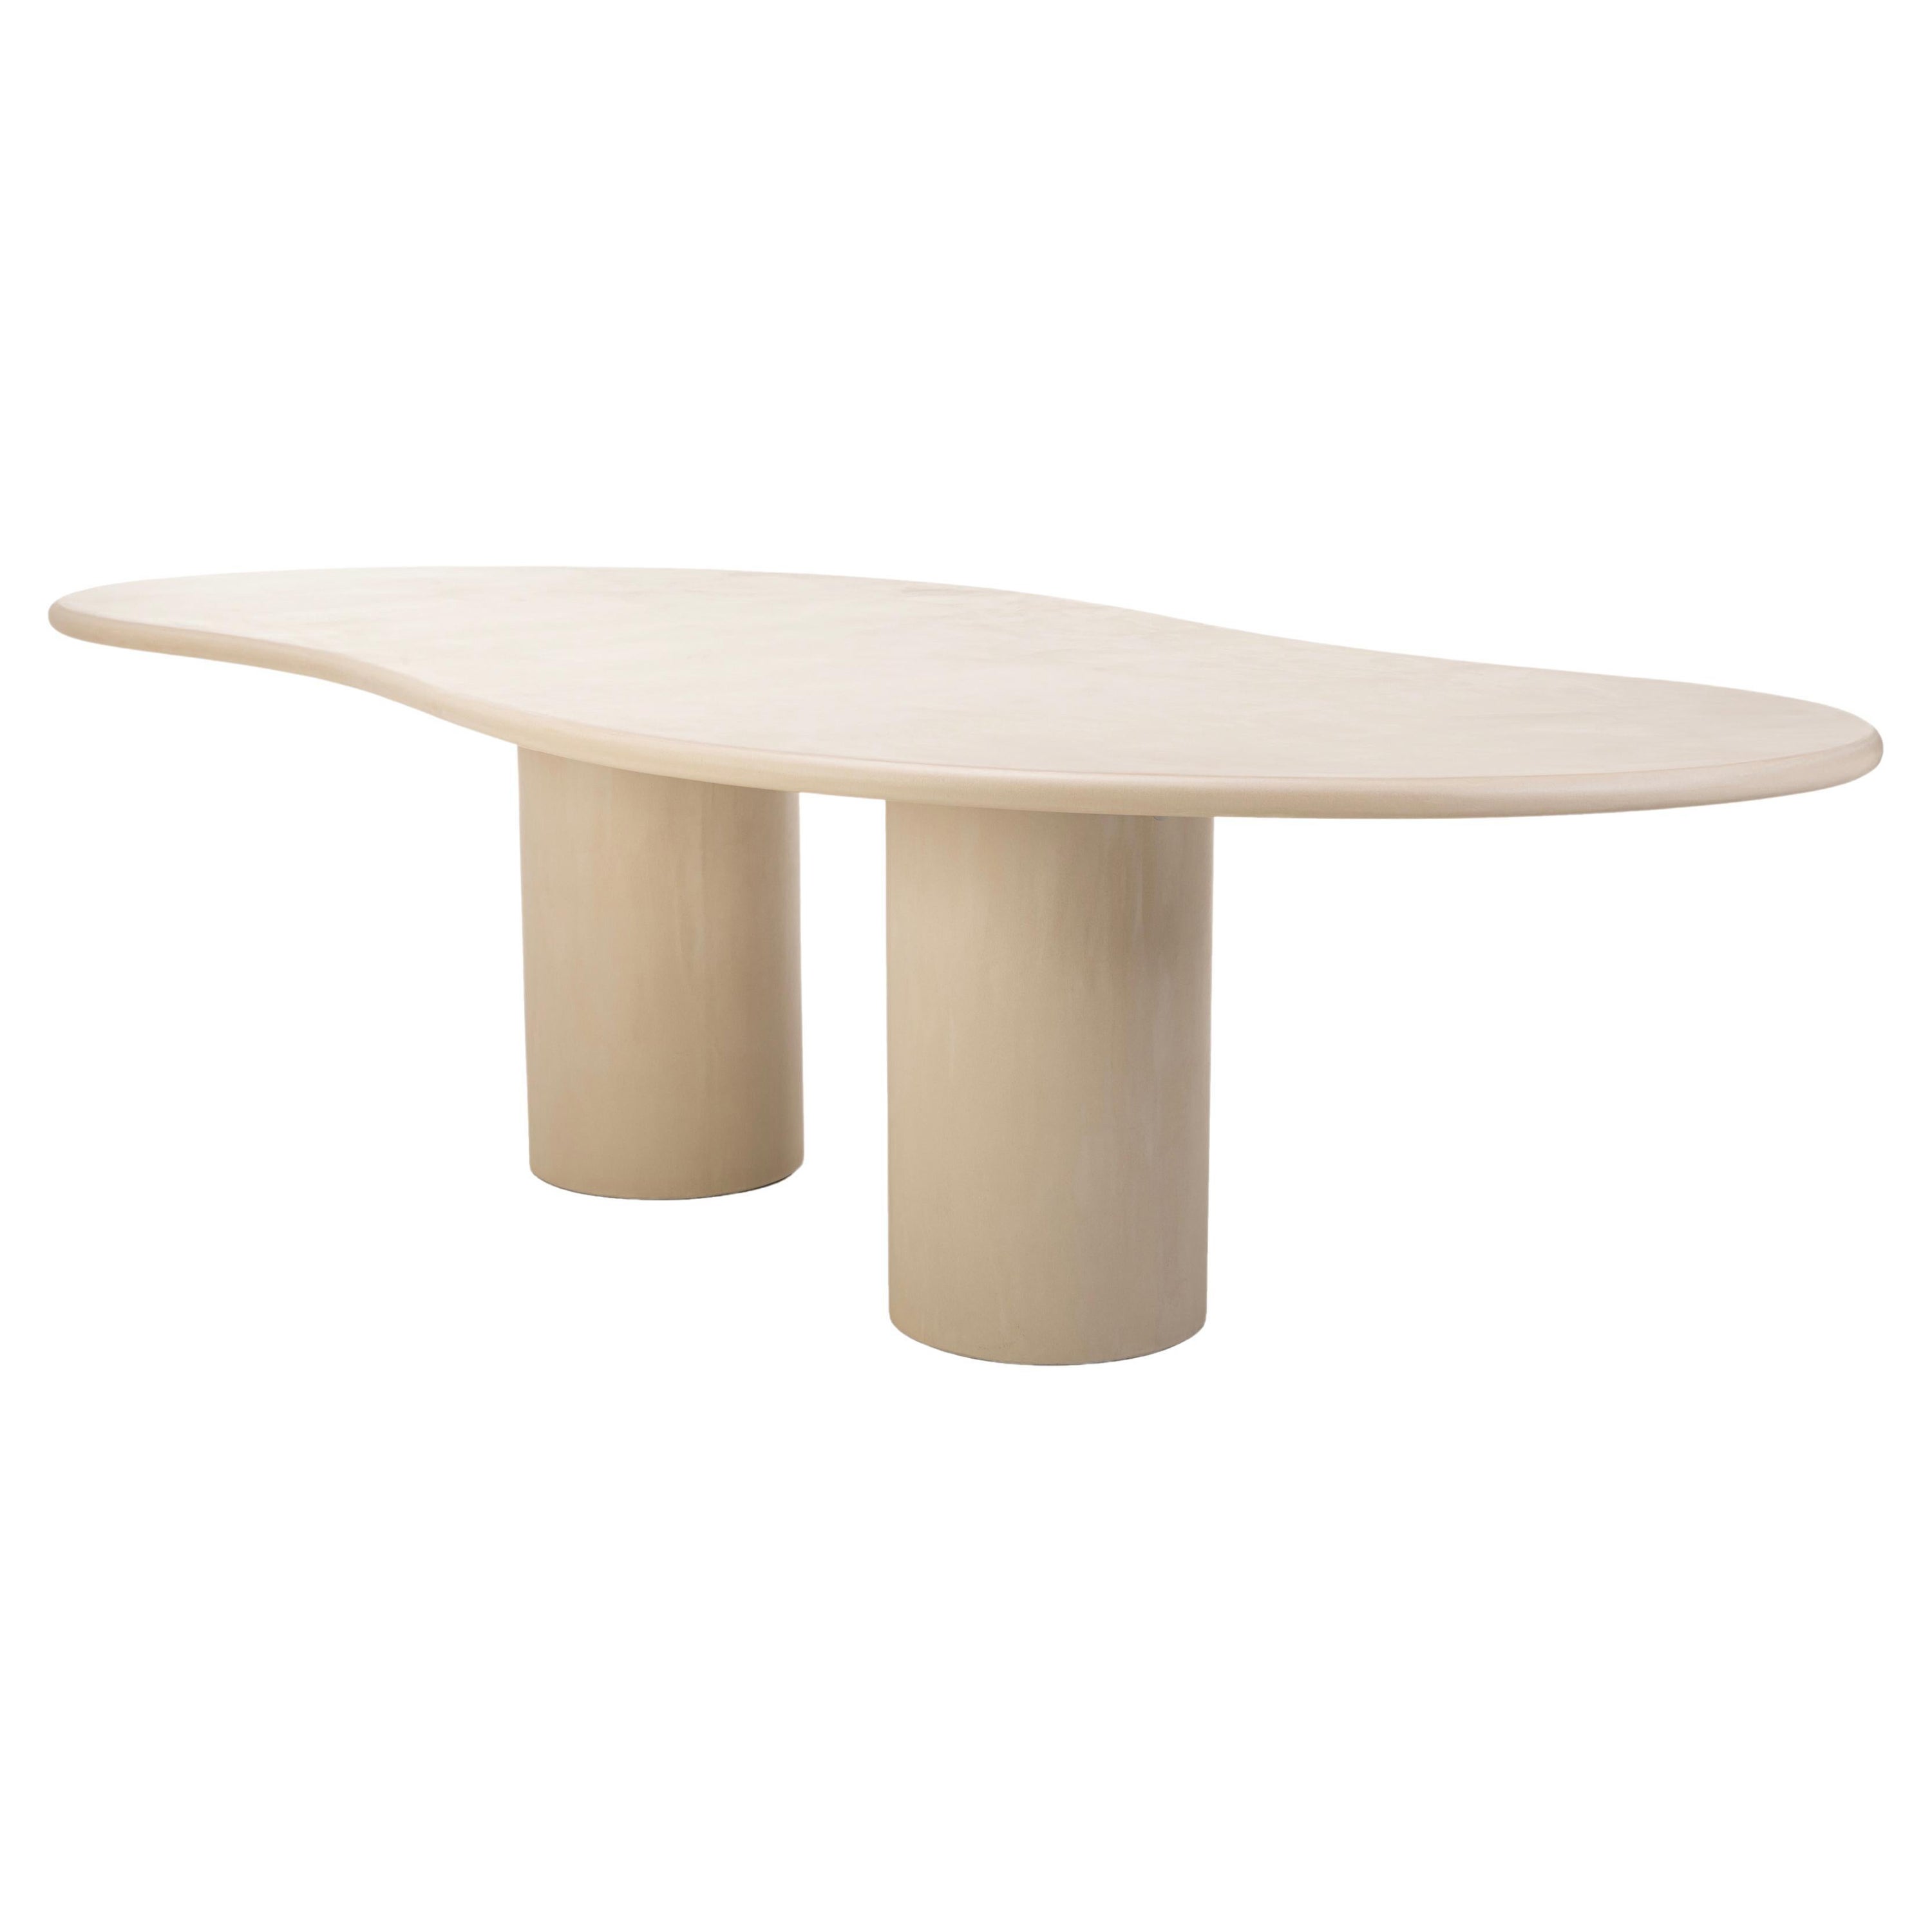 Natural Plaster Dining Table "Latus" 280 by Isabelle Beaumont